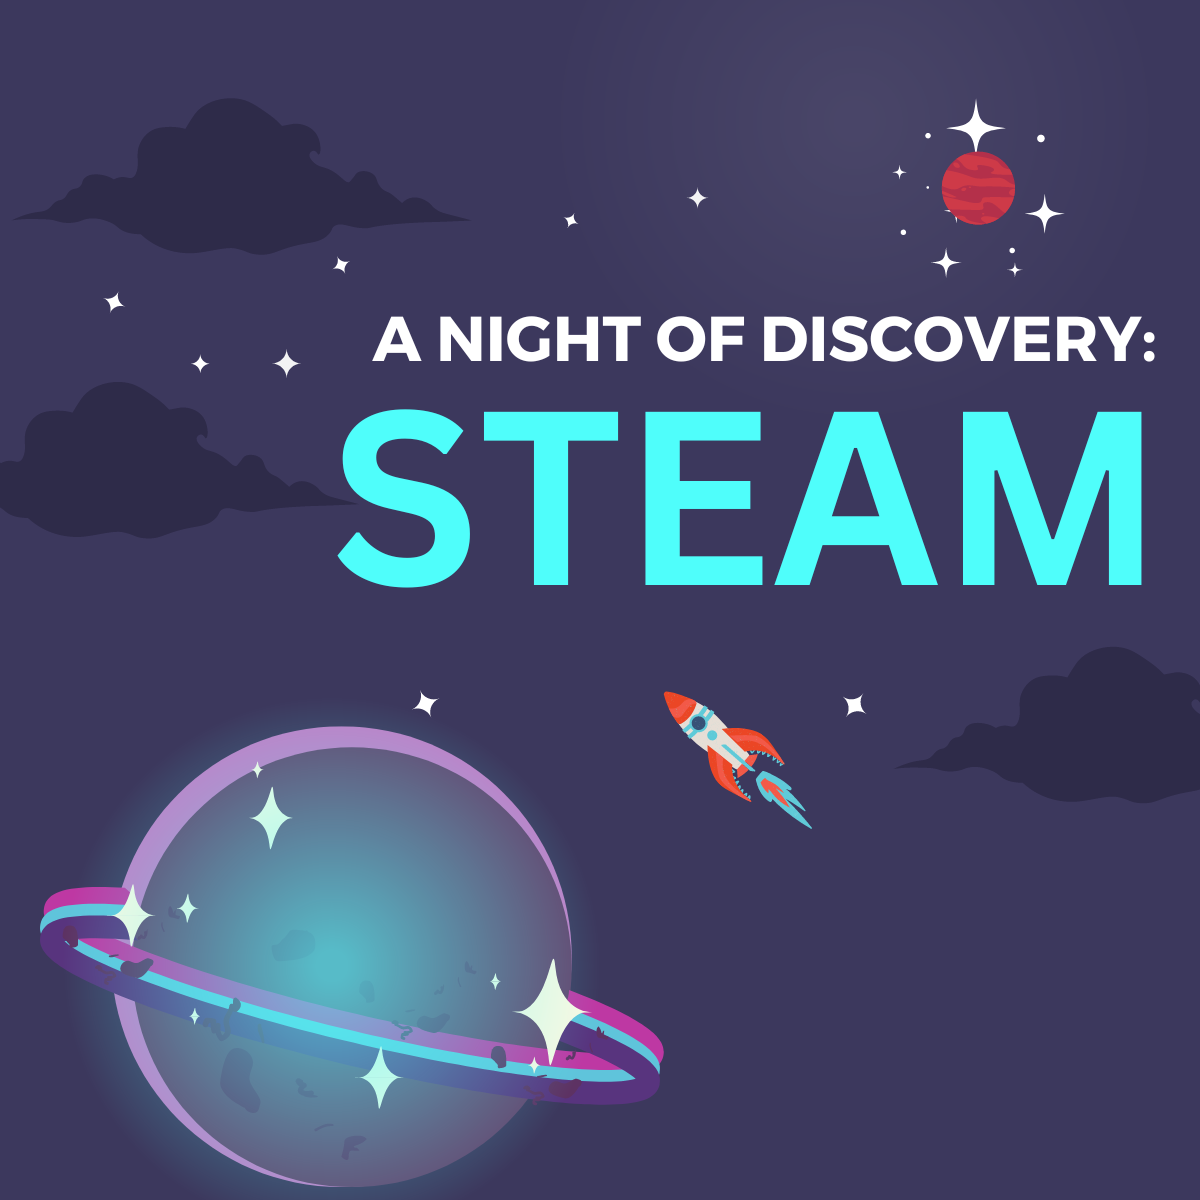 Night of Discovery